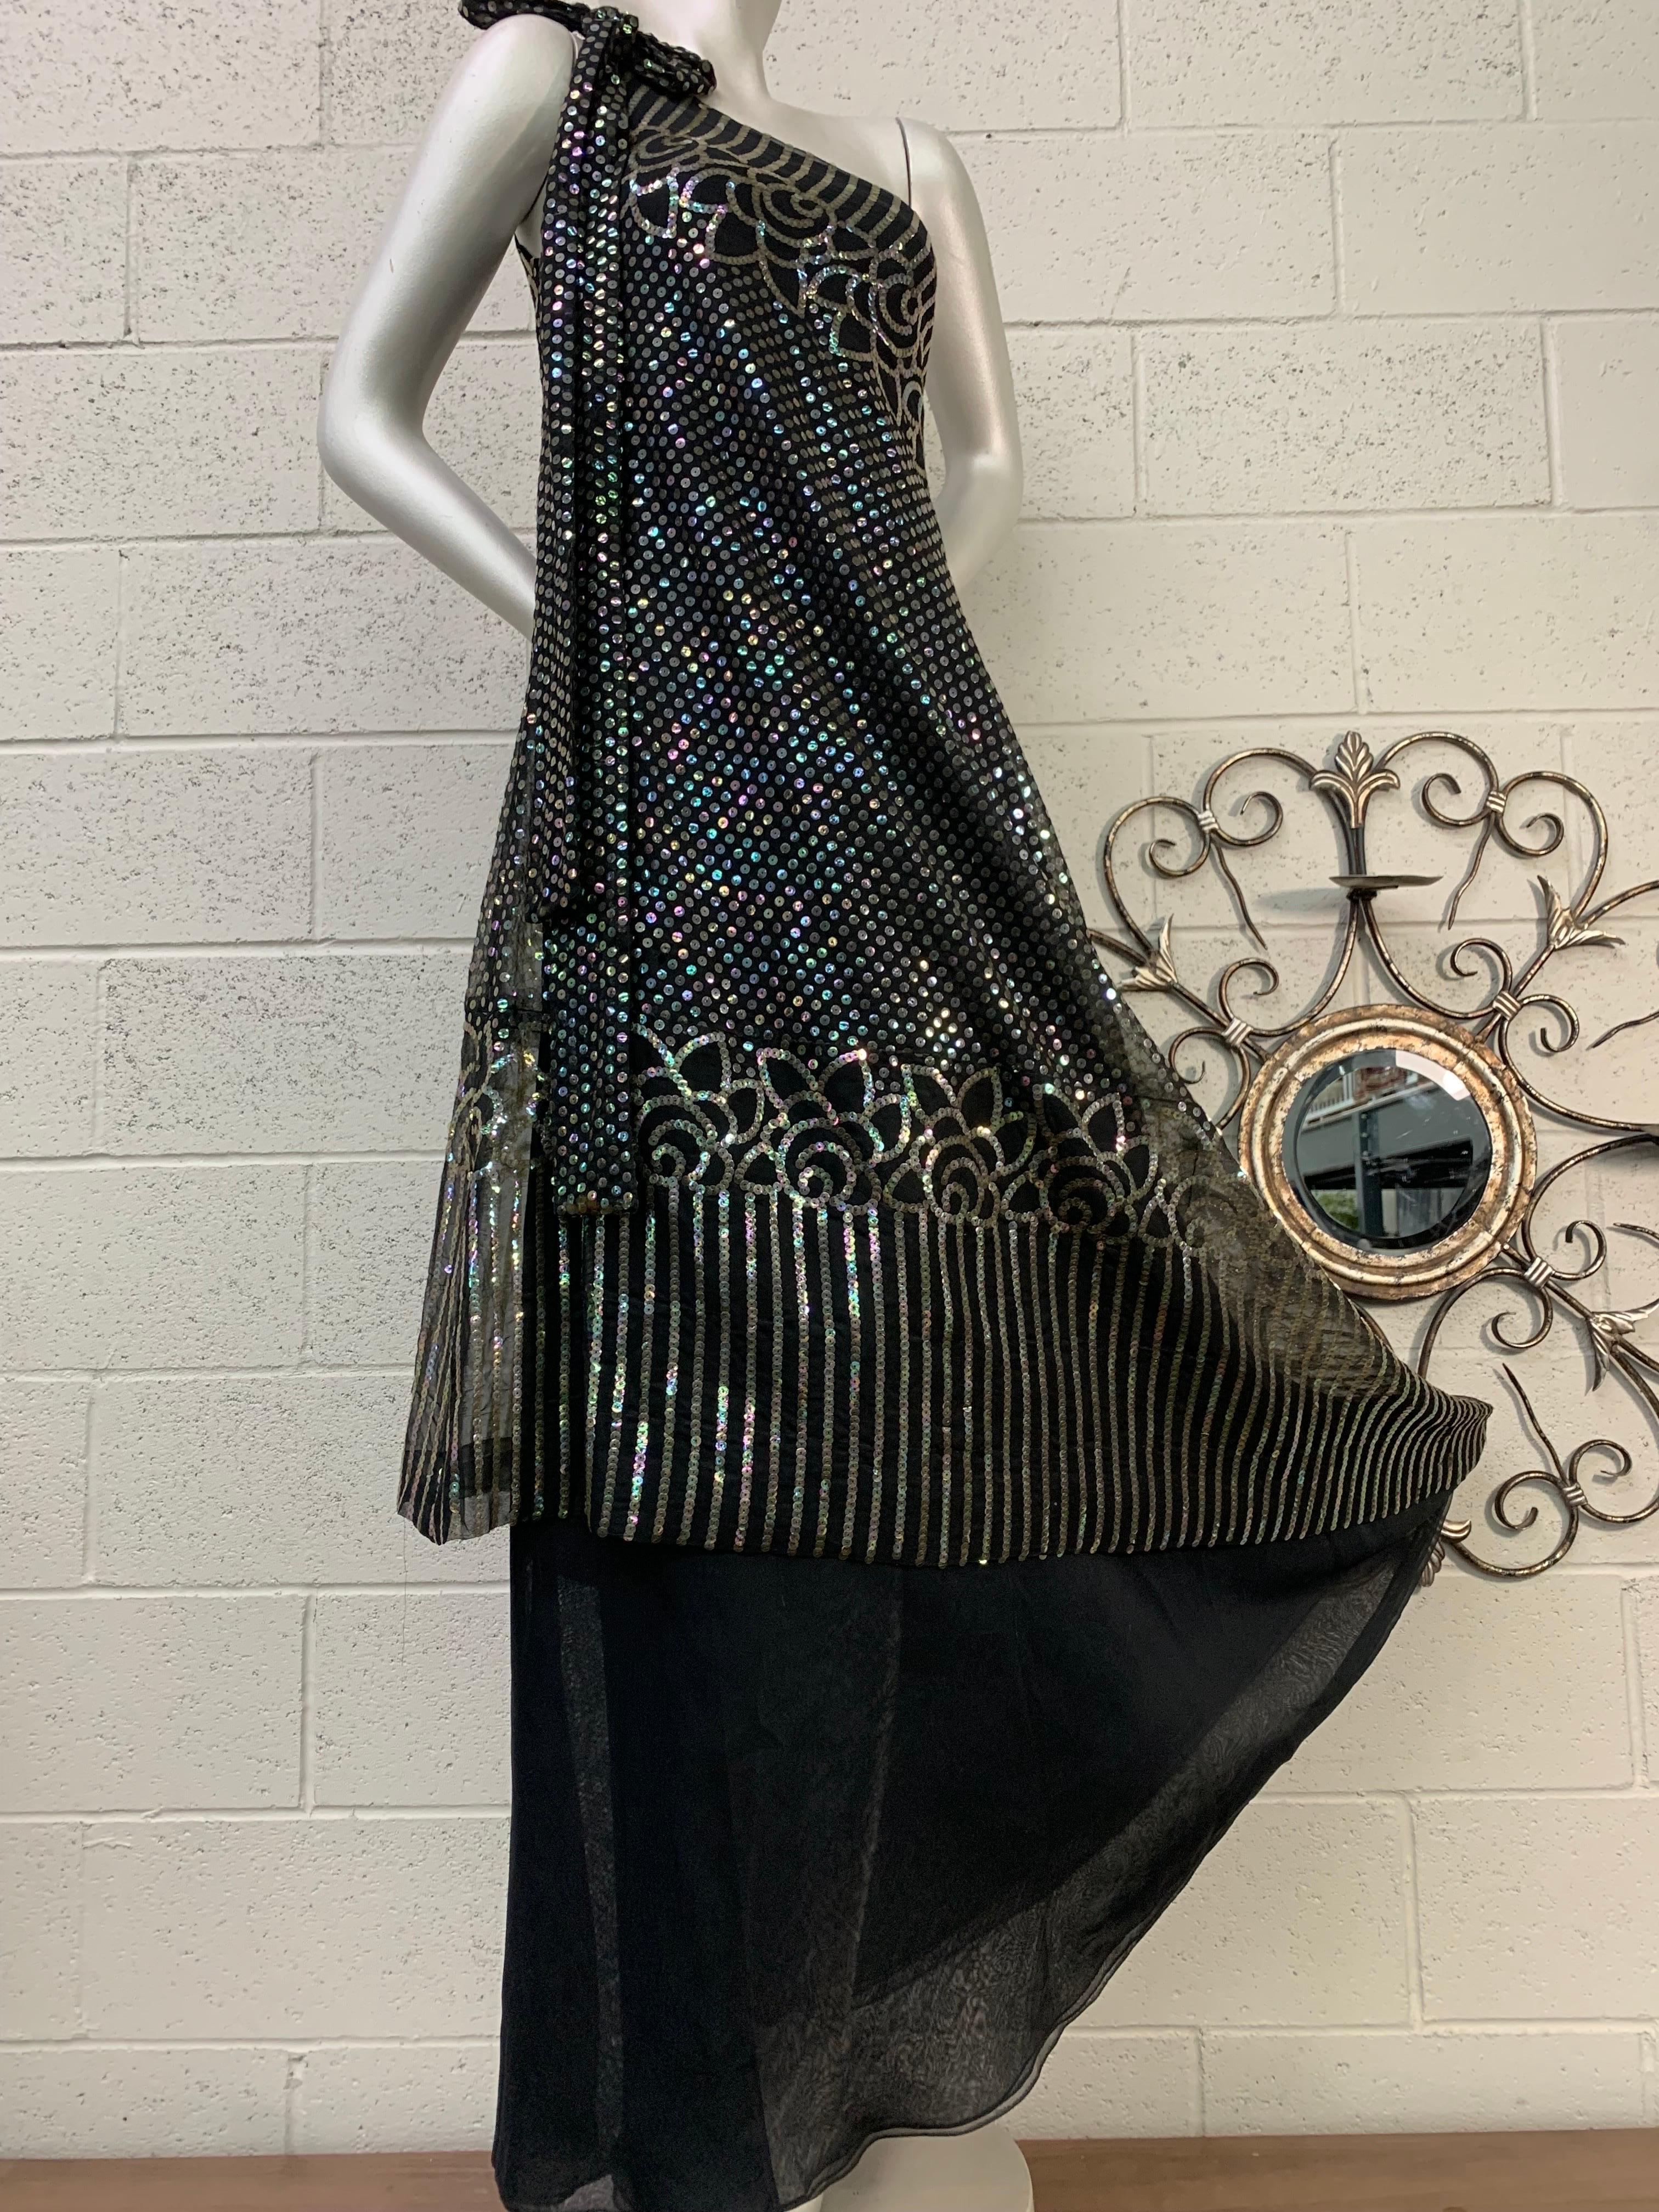 1970 Ruben Panis Black Chiffon Hologram Sequin Art Deco Styled One-Shoulder Gown: Asymmetrical shoulder closure with bow detail on double-layered  chiffon gown. Handkerchief hem sequined overlay features a spectacular Art Deco graphic design in